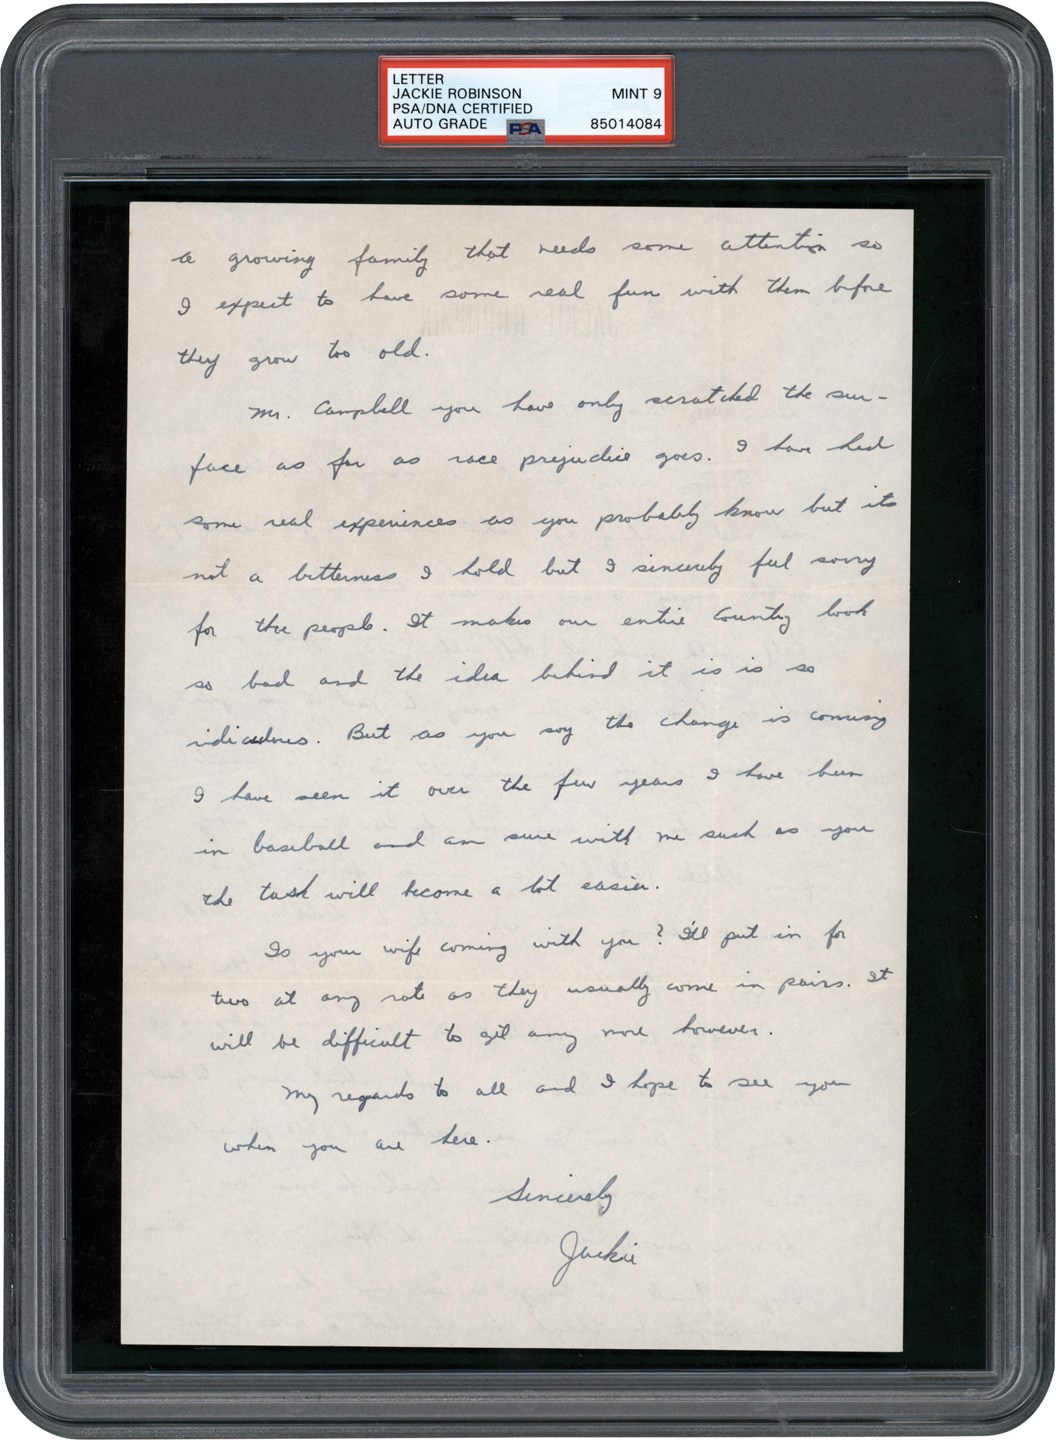 - Circa 1956 Jackie Robinson Handwritten Letter with Racial Content - "It's Not a Bitterness I Hold but I Sincerely Feel Sorry for the People" (Who are Racially Prejudiced) (PSA MINT 9)